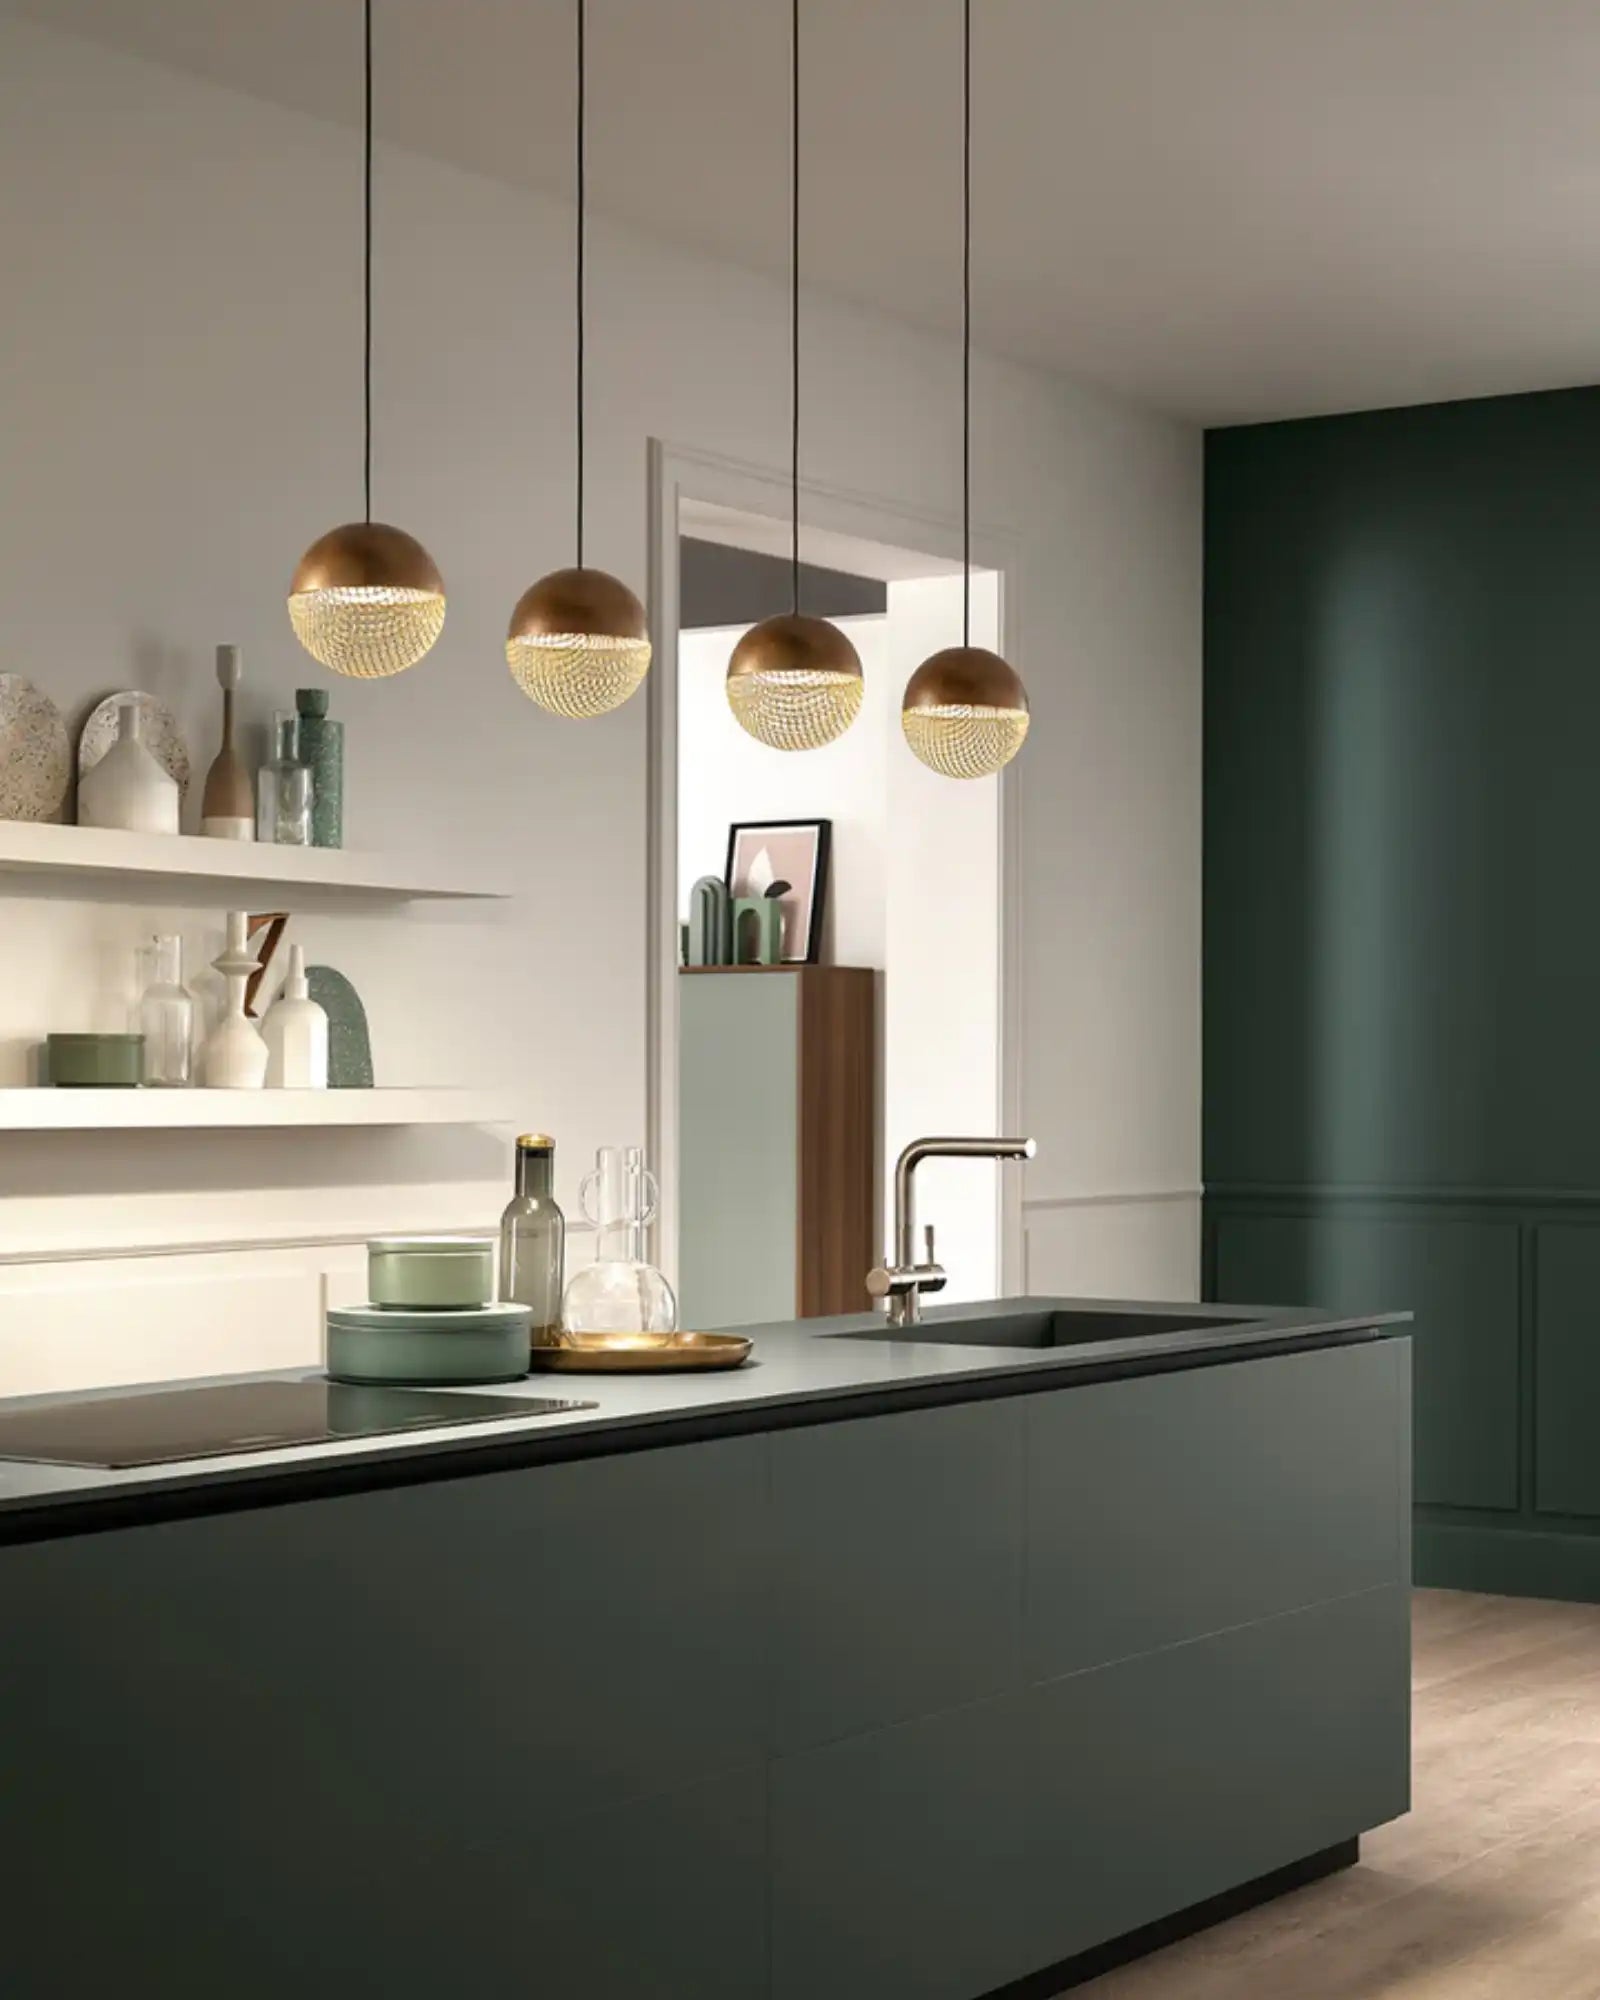 Iglu Pendant Light by Masiero Lighting featured within a contemporary kitchen | Nook Collections